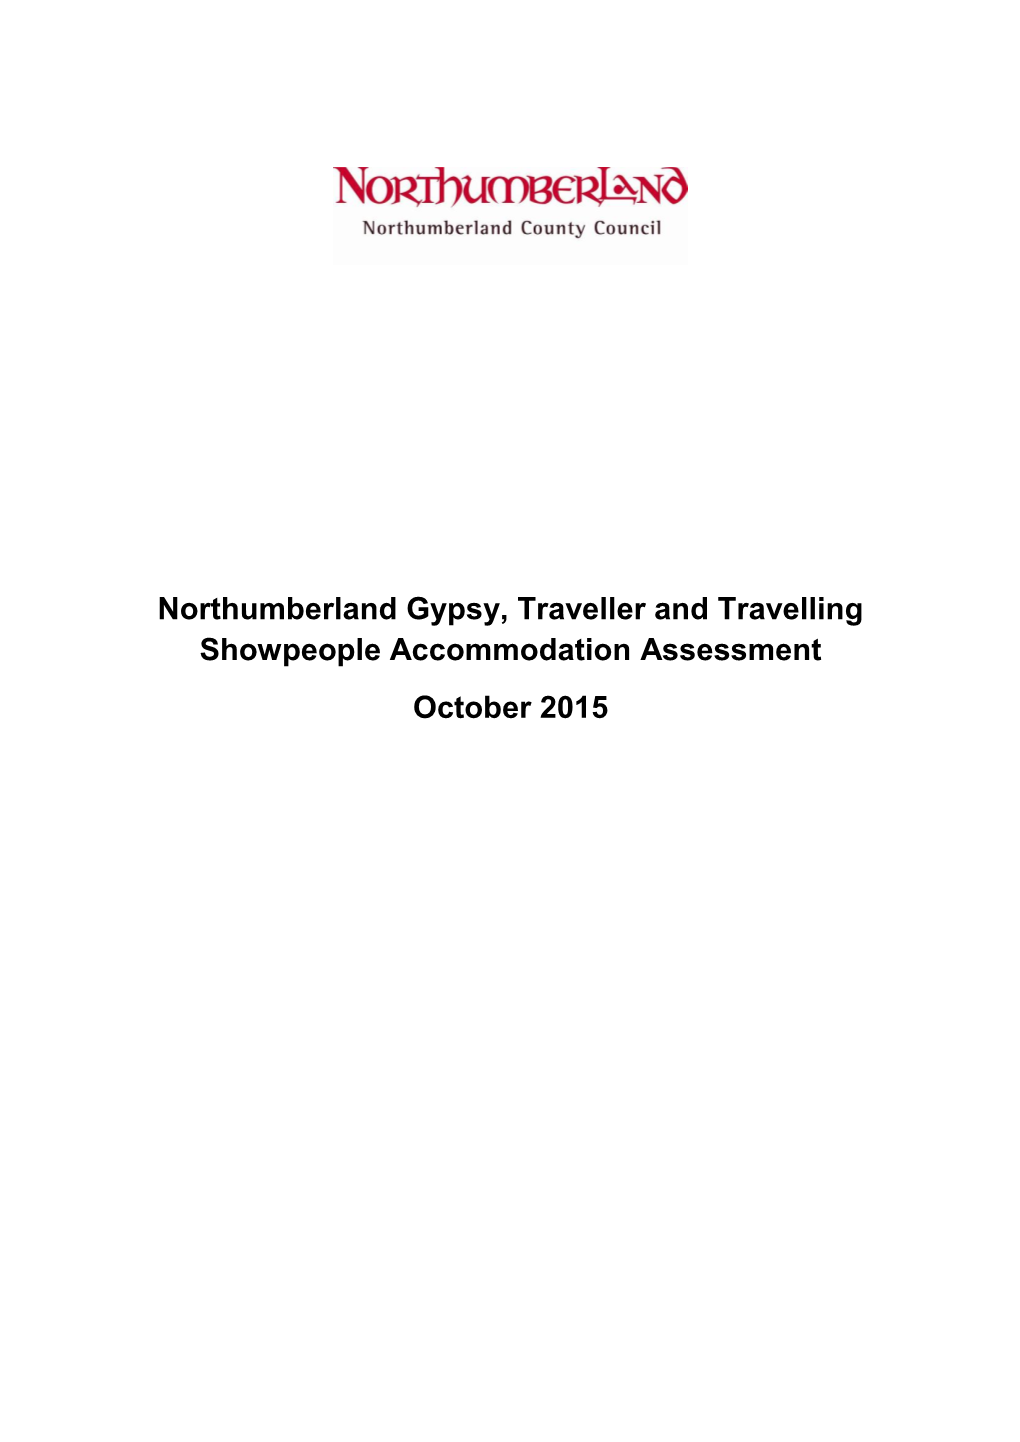 Gypsy and Traveller Accommodation Assessment (October 2015)